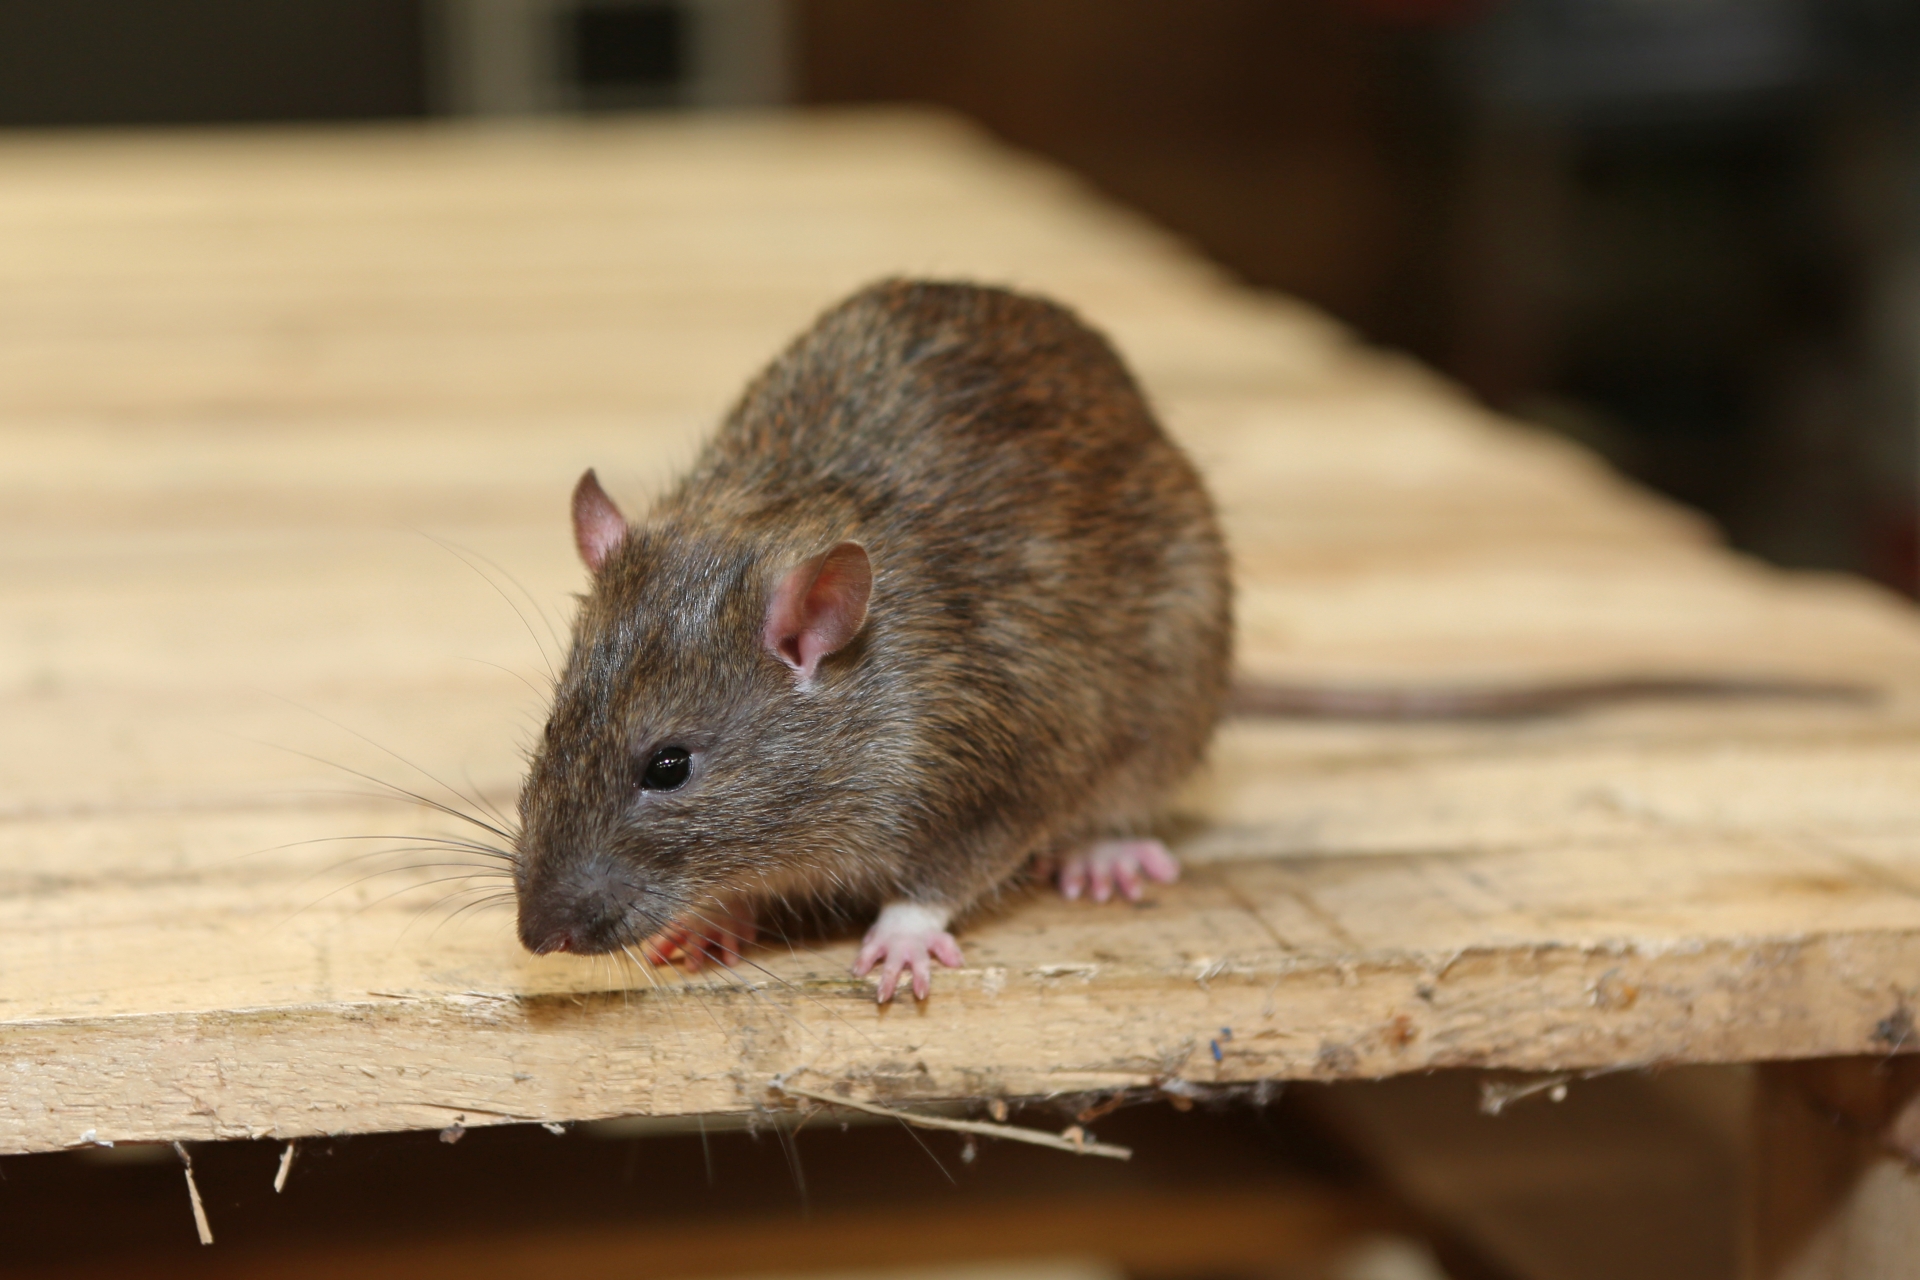 Rat Control, Pest Control in West Horsley, East Horsley, Effingham, KT24. Call Now 020 8166 9746